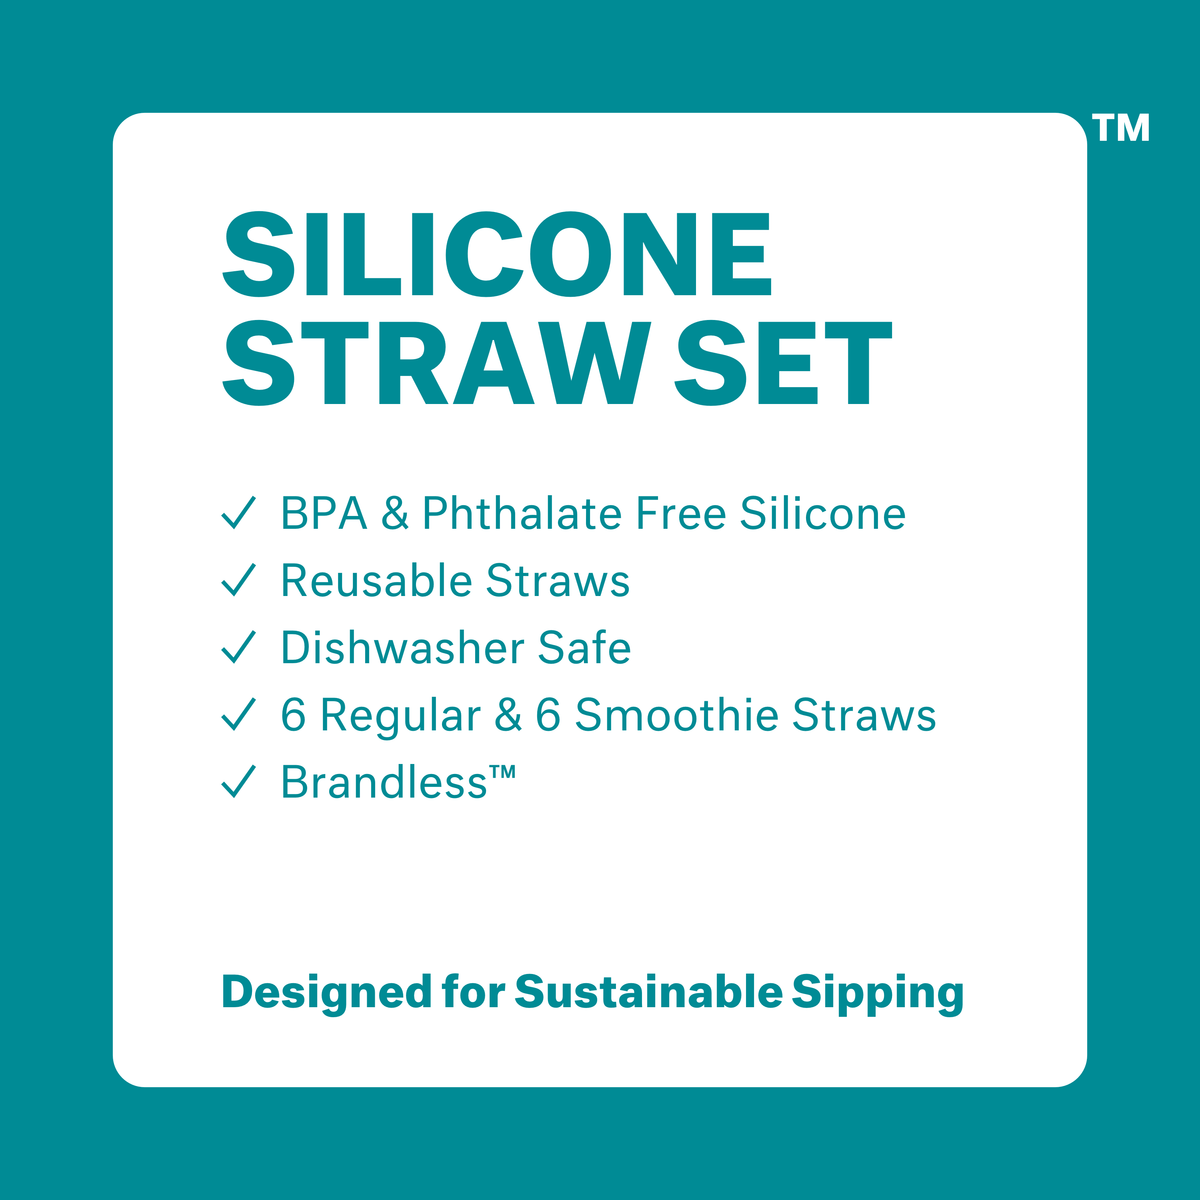 Silicone straw set: BPA and phthalate free silicone, reusable straws, dishwasher safe, 6 regular and 6 smoothie straws, brandless.  Designed for sustainable sipping.